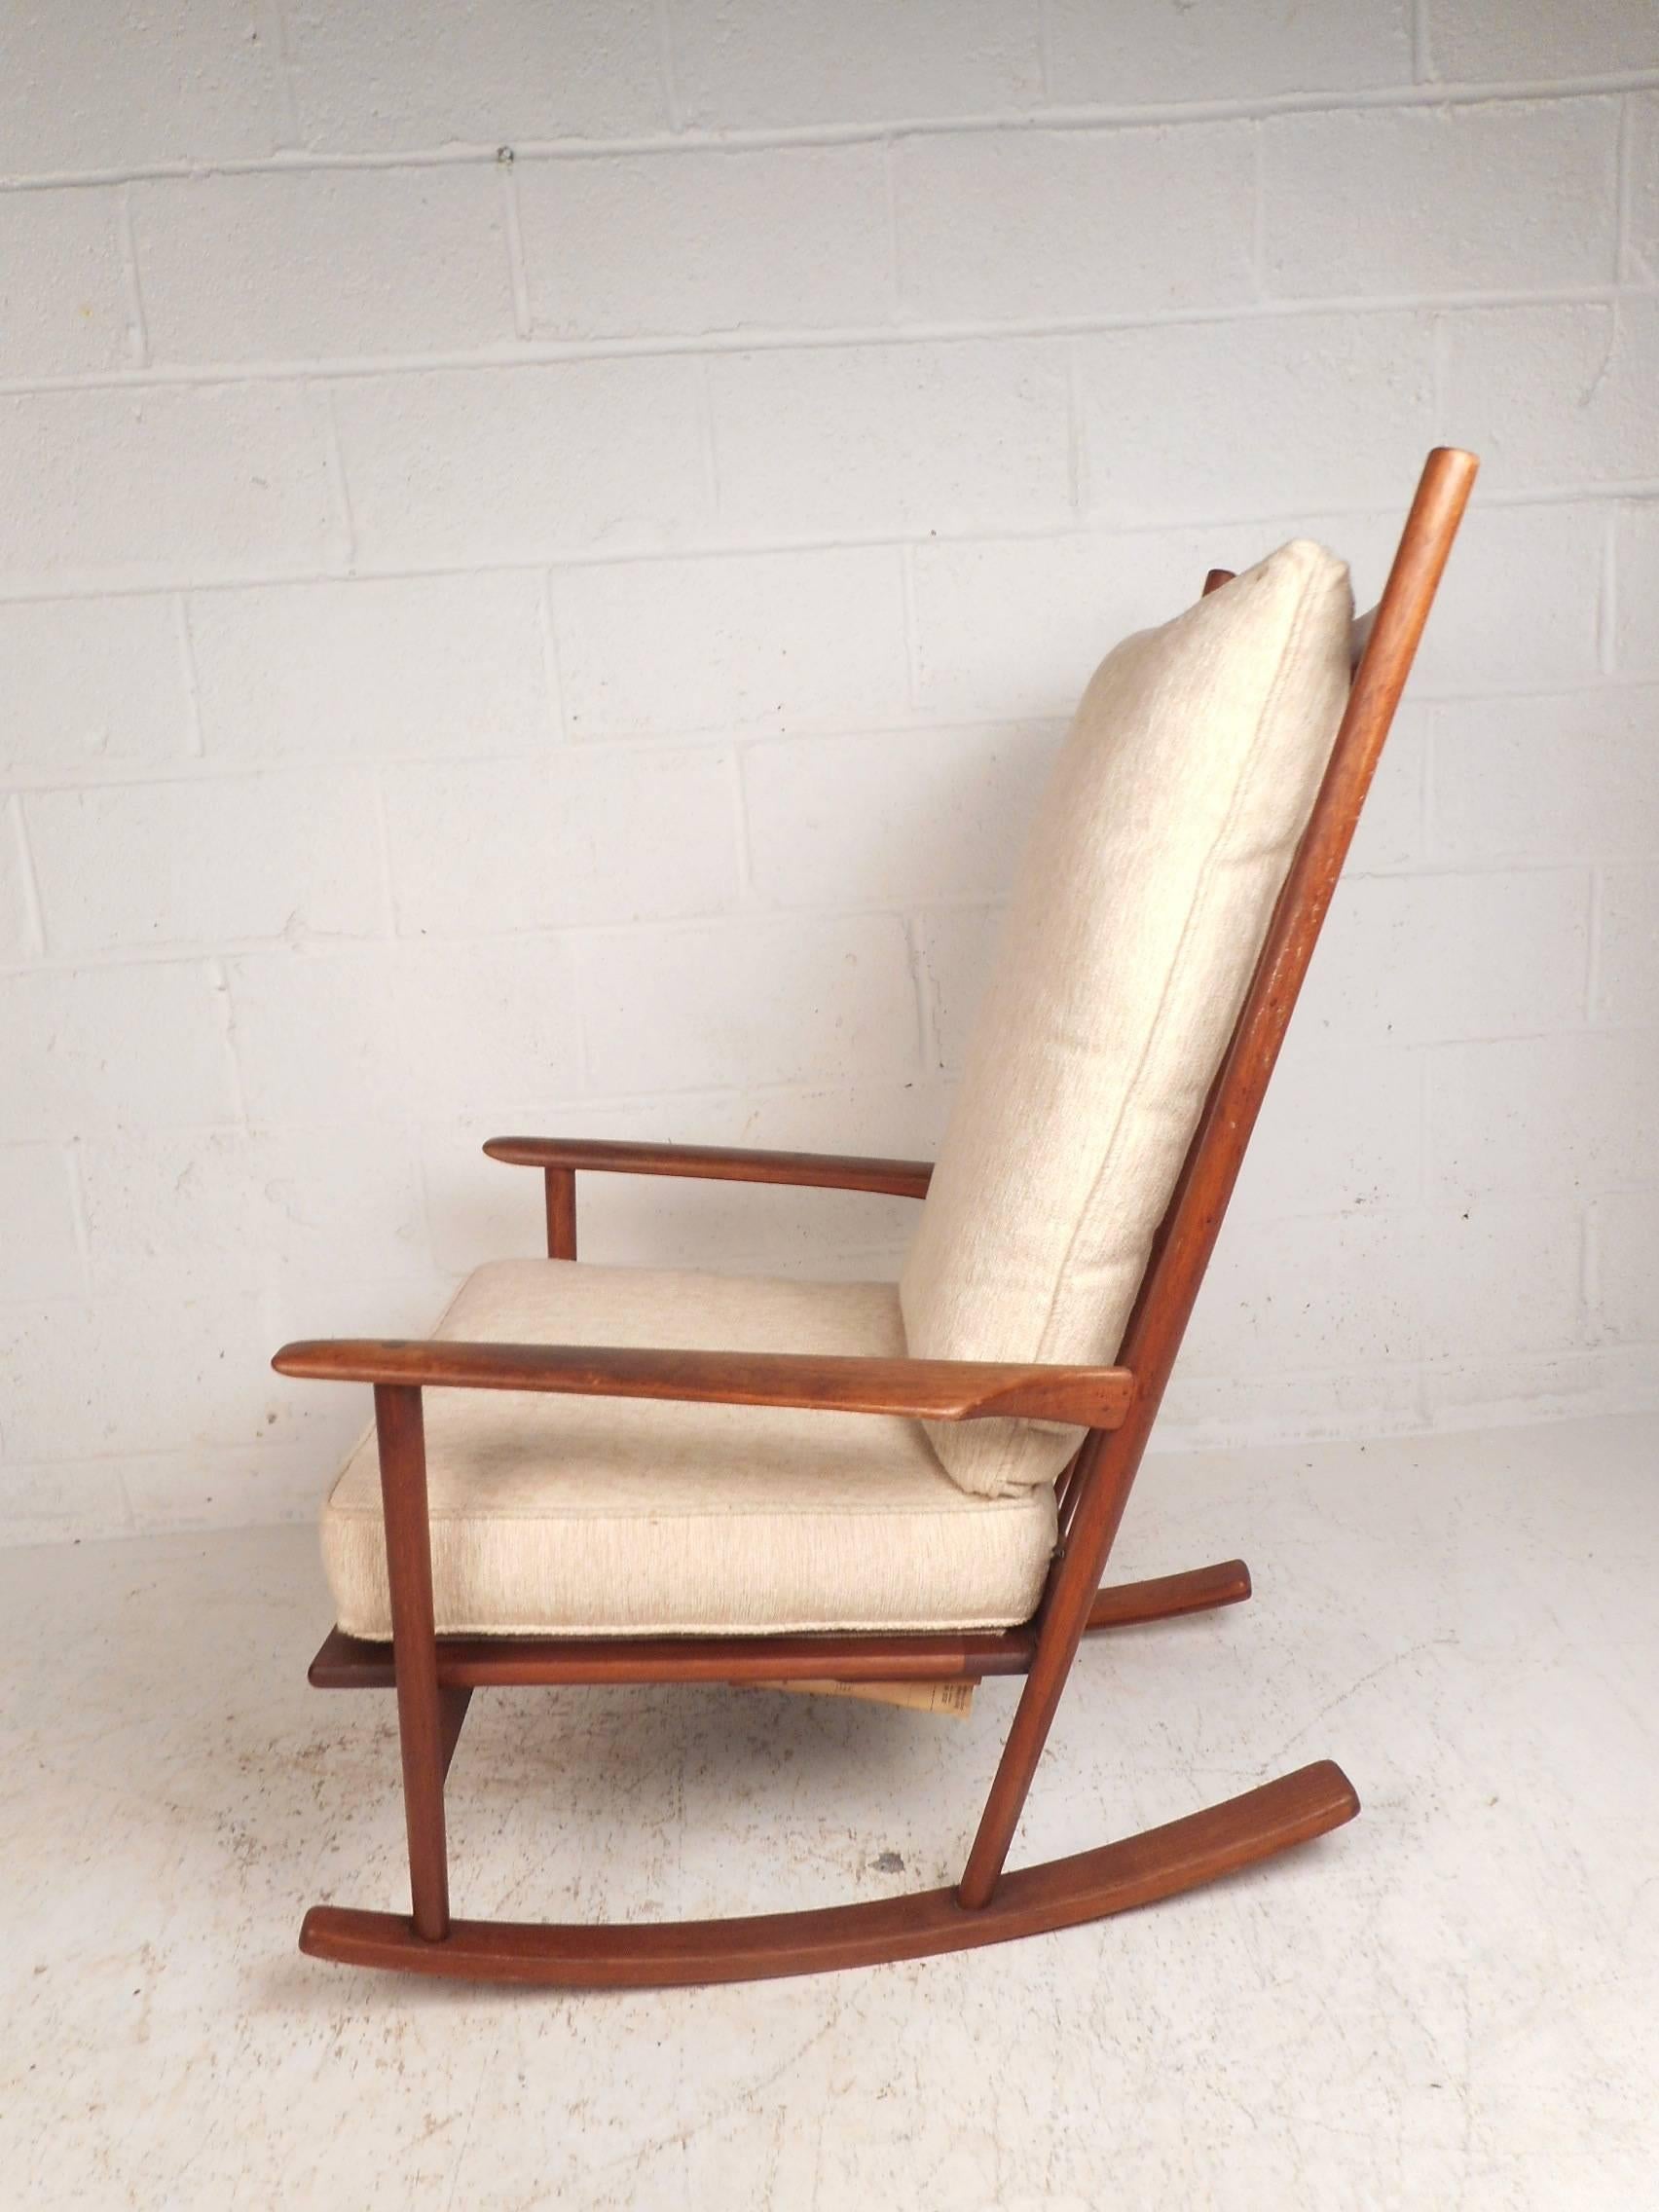 This gorgeous Mid-Century Modern rocking chair features a high spoked backrest with a curved top and sculpted arm rests. An extremely comfortable rocking chair with two overstuffed removable cushions covered in an off-white plush fabric. Sturdy